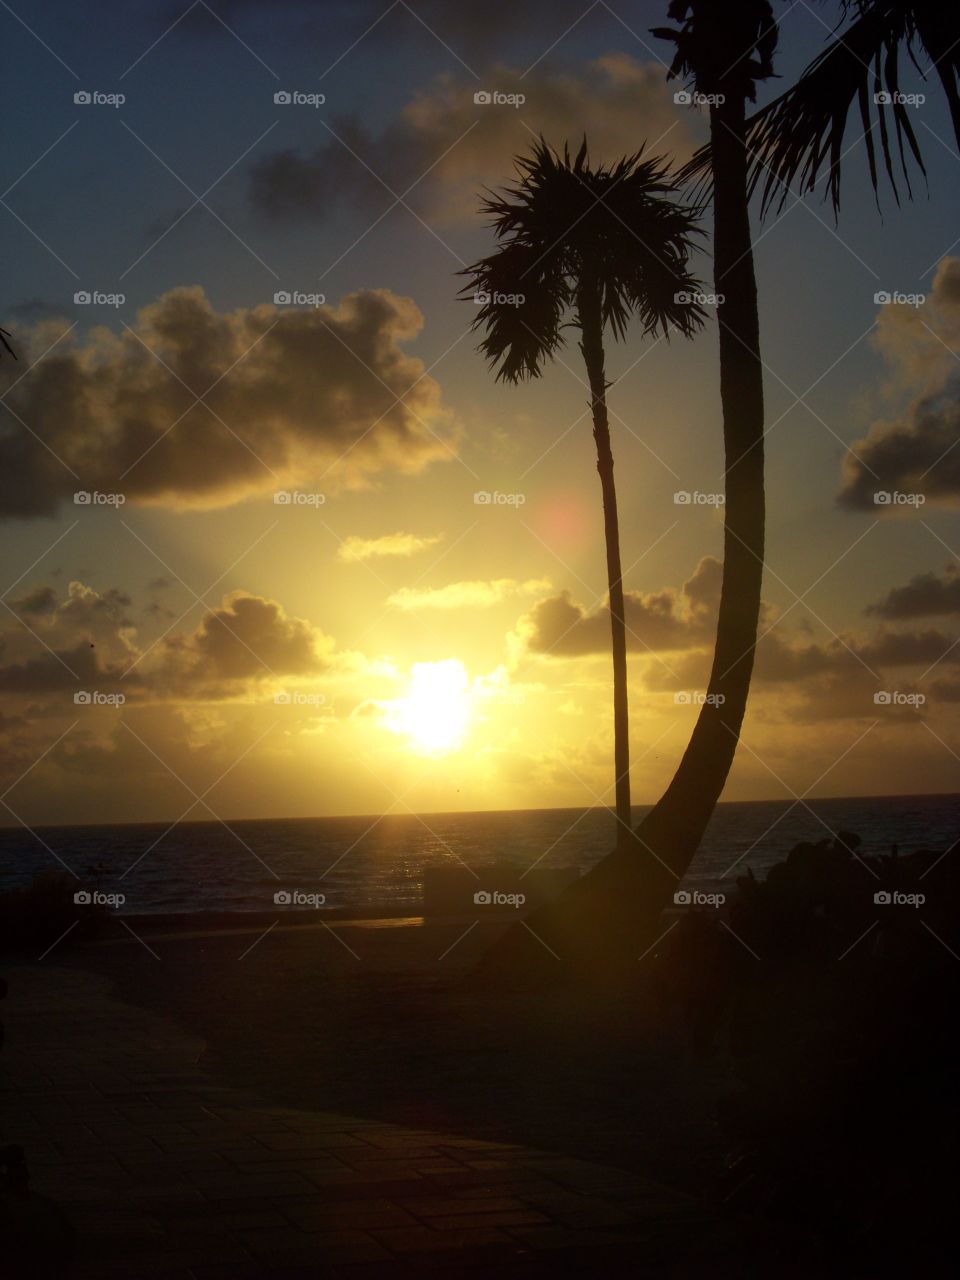 Sunset and palm trees Florida